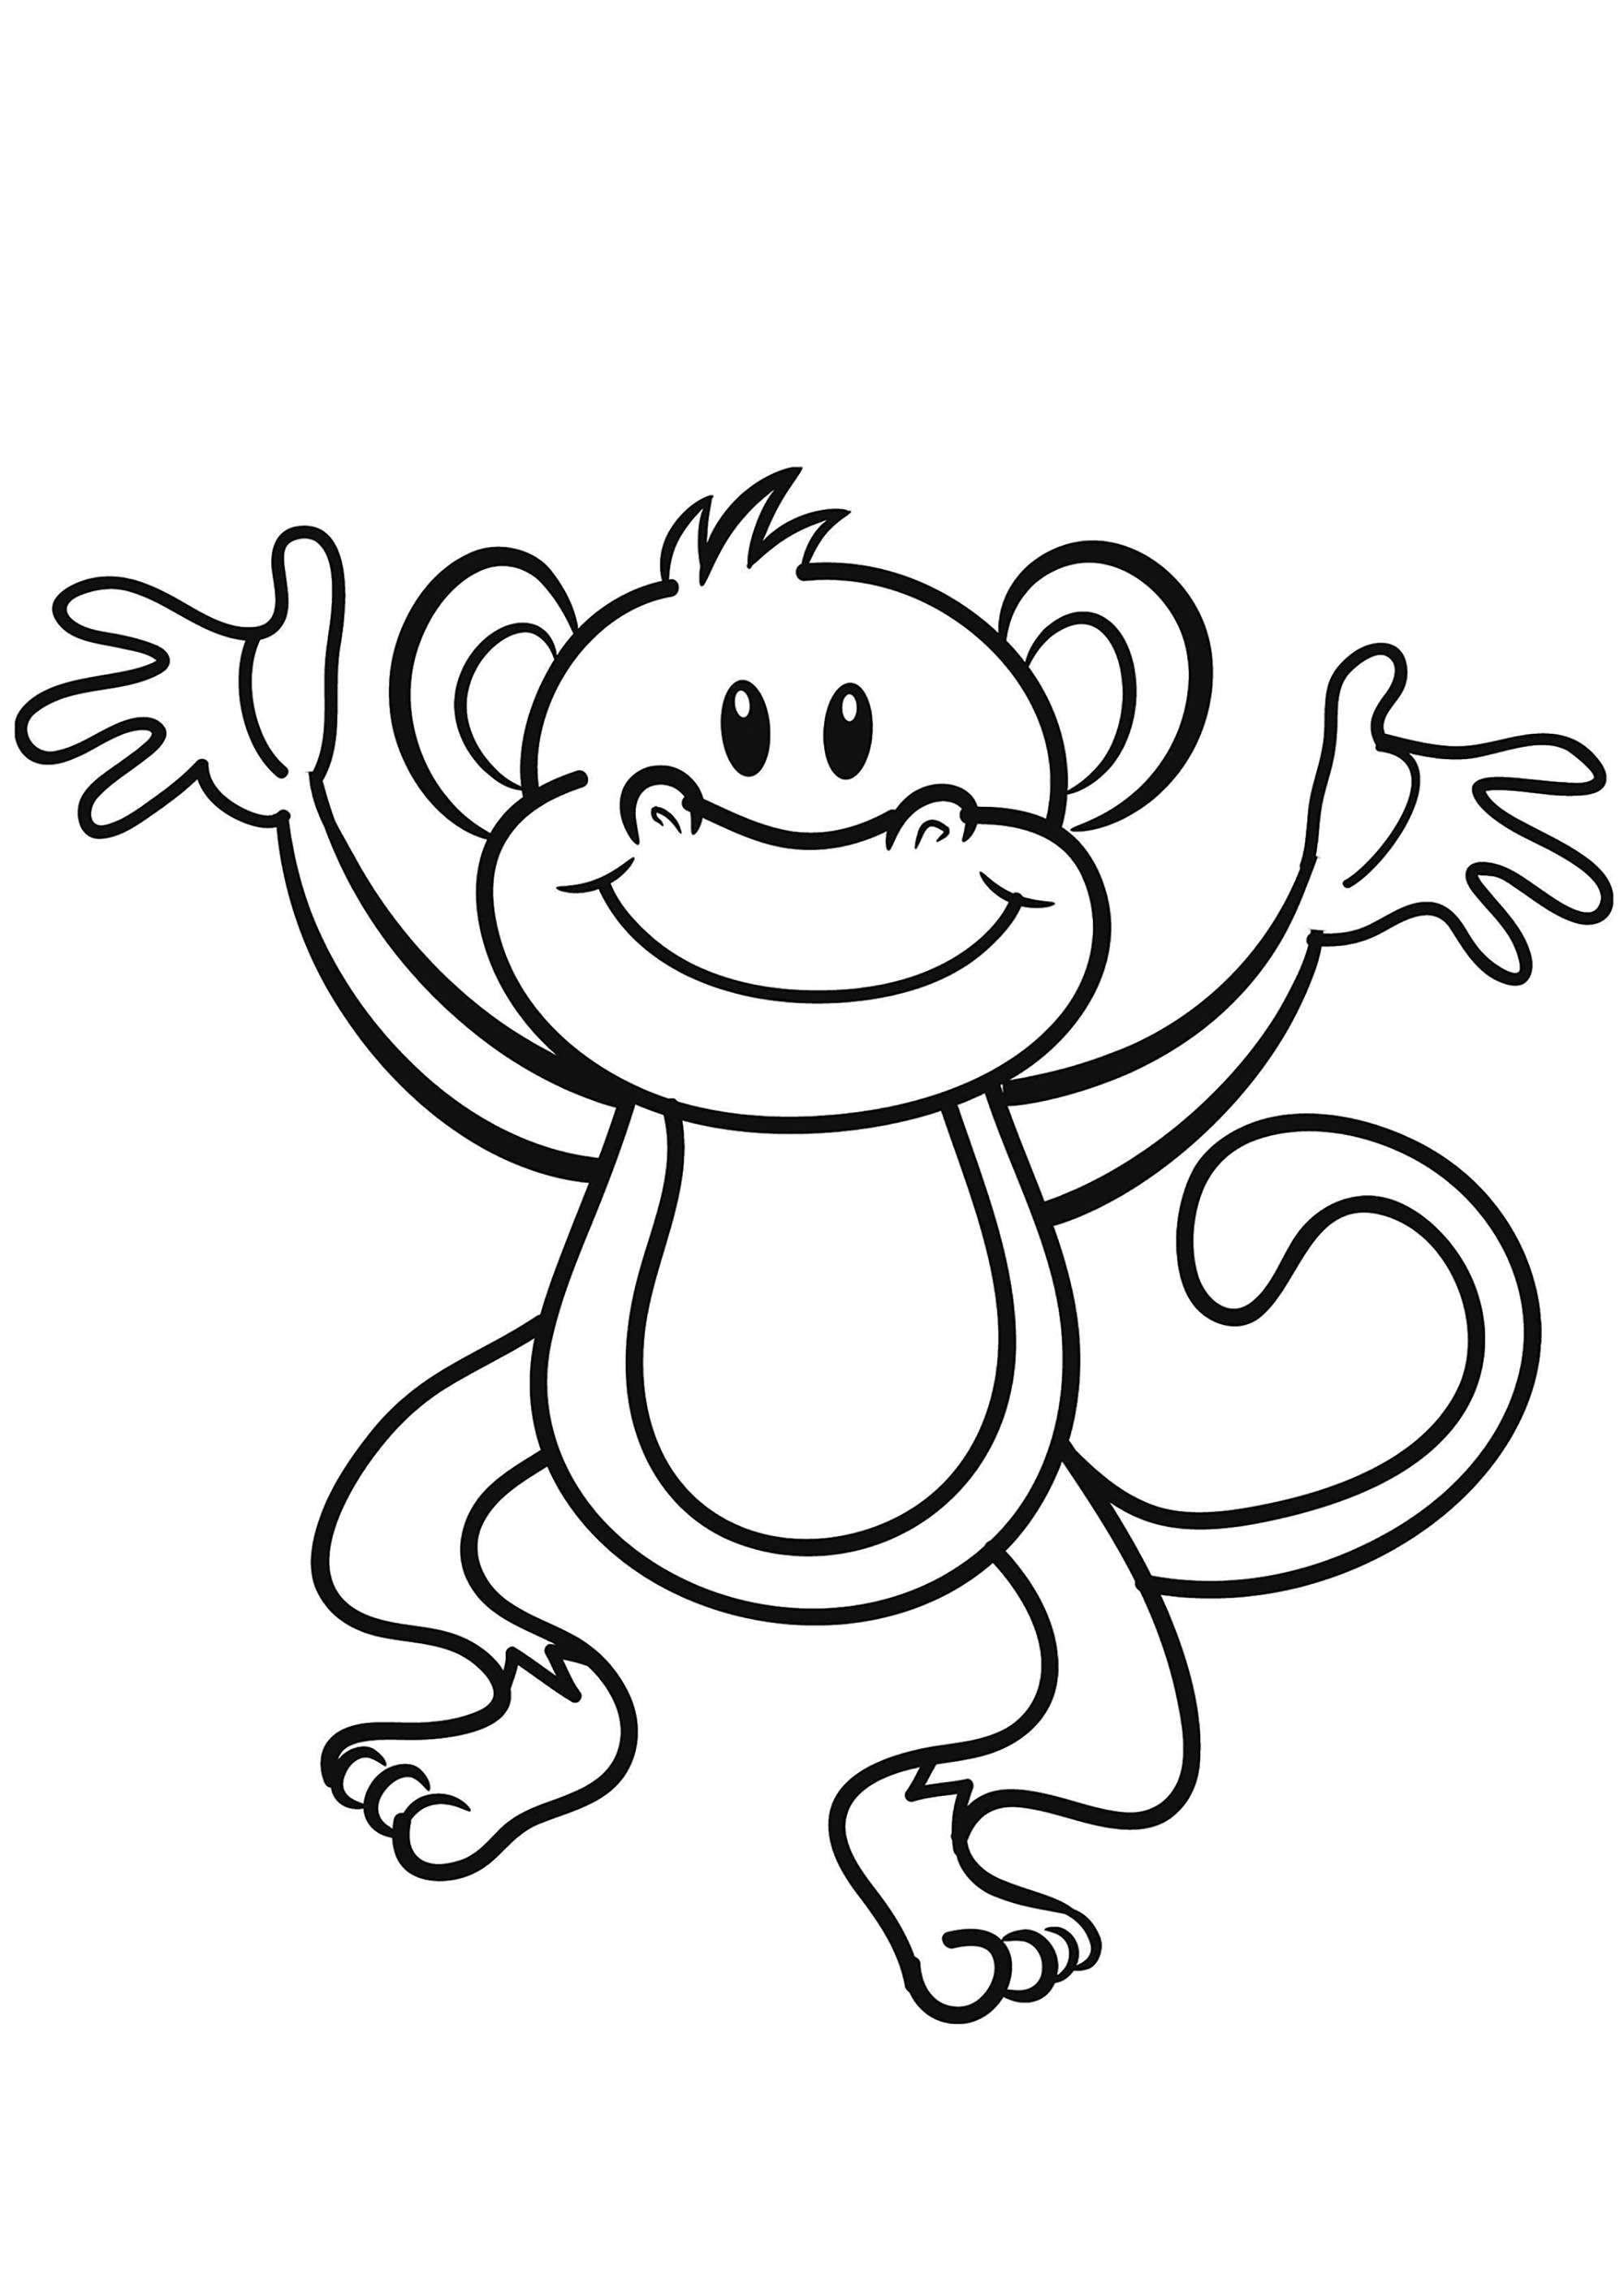 free-monkey-drawing-to-download-and-color-monkeys-kids-coloring-pages